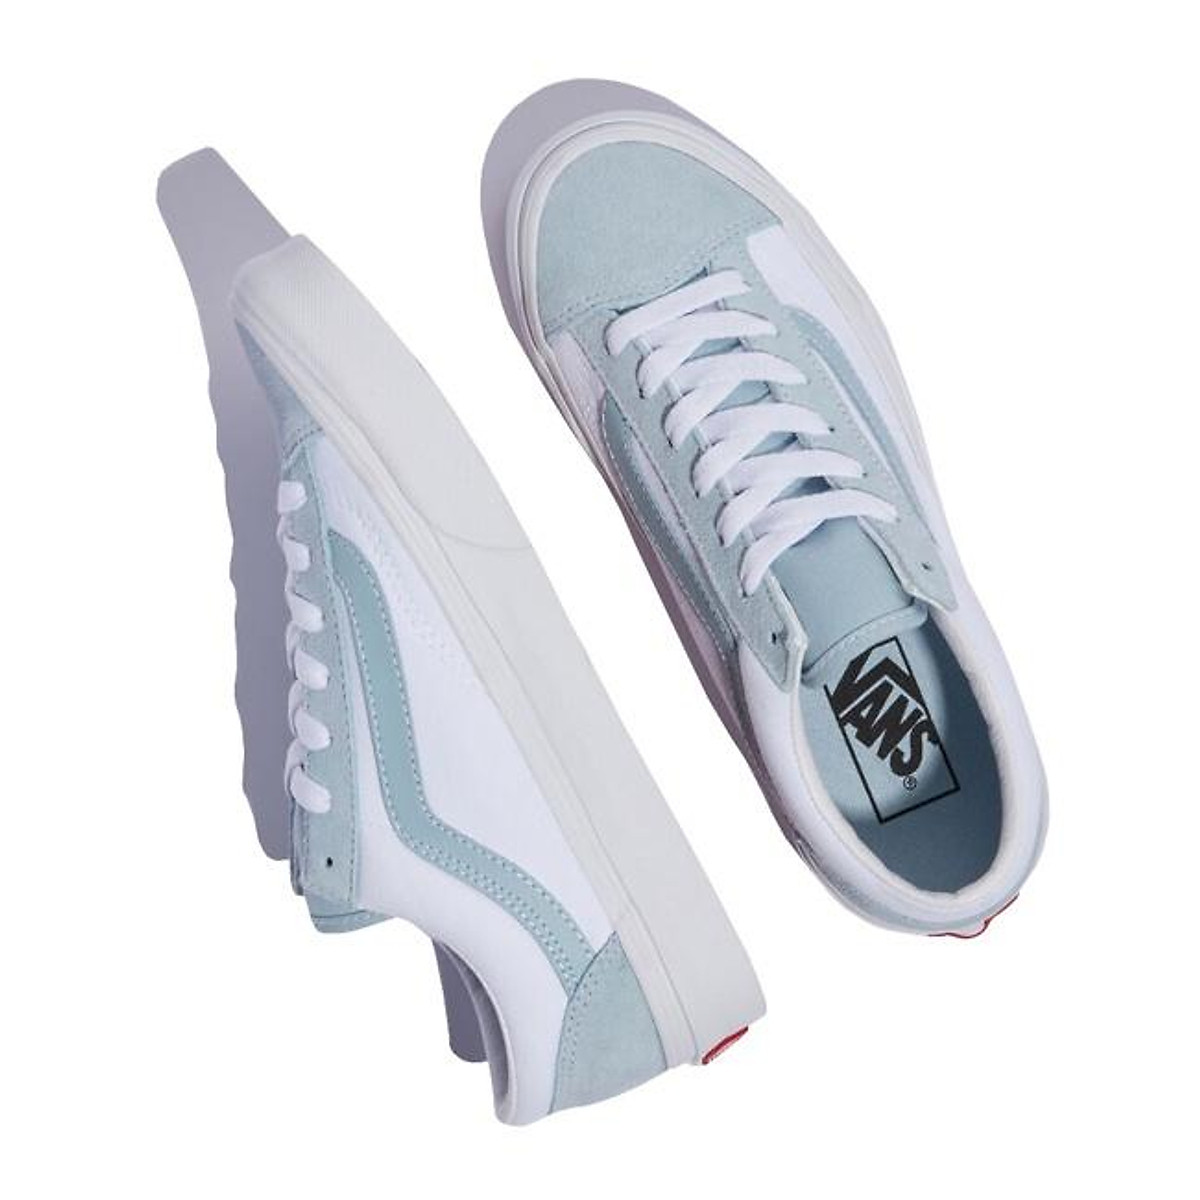 Giày Vans Old Skool Style 36 Classic Sport - VN0A54F69LY - Giày thể thao  nam cổ thấp